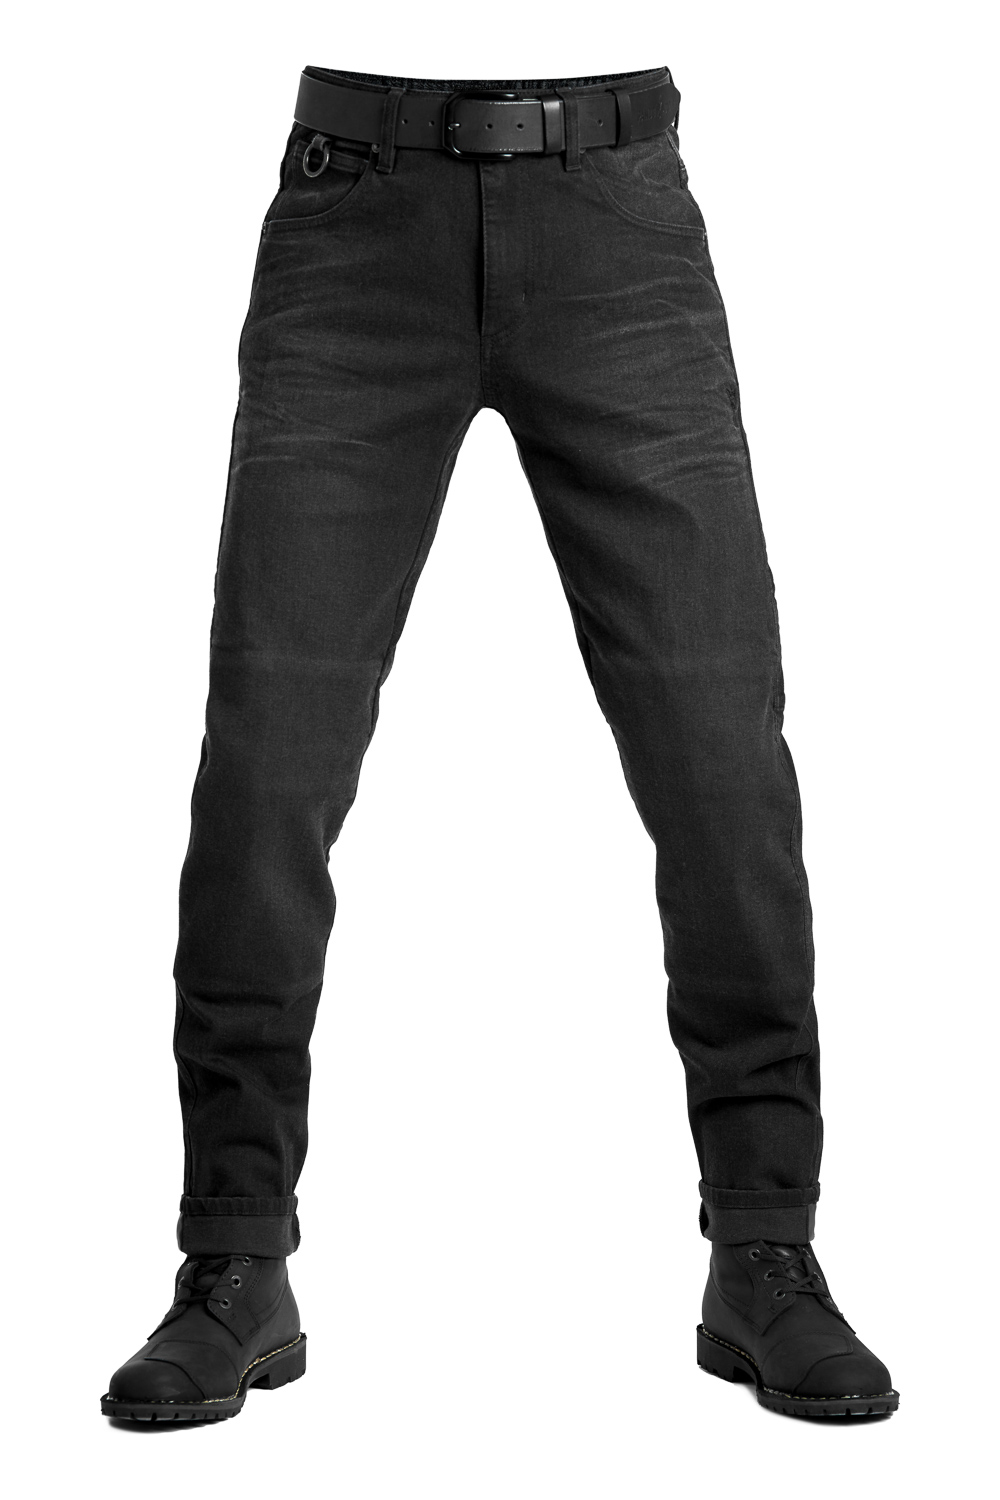 Boss Dyn 01 - Motorcycle Jeans front view